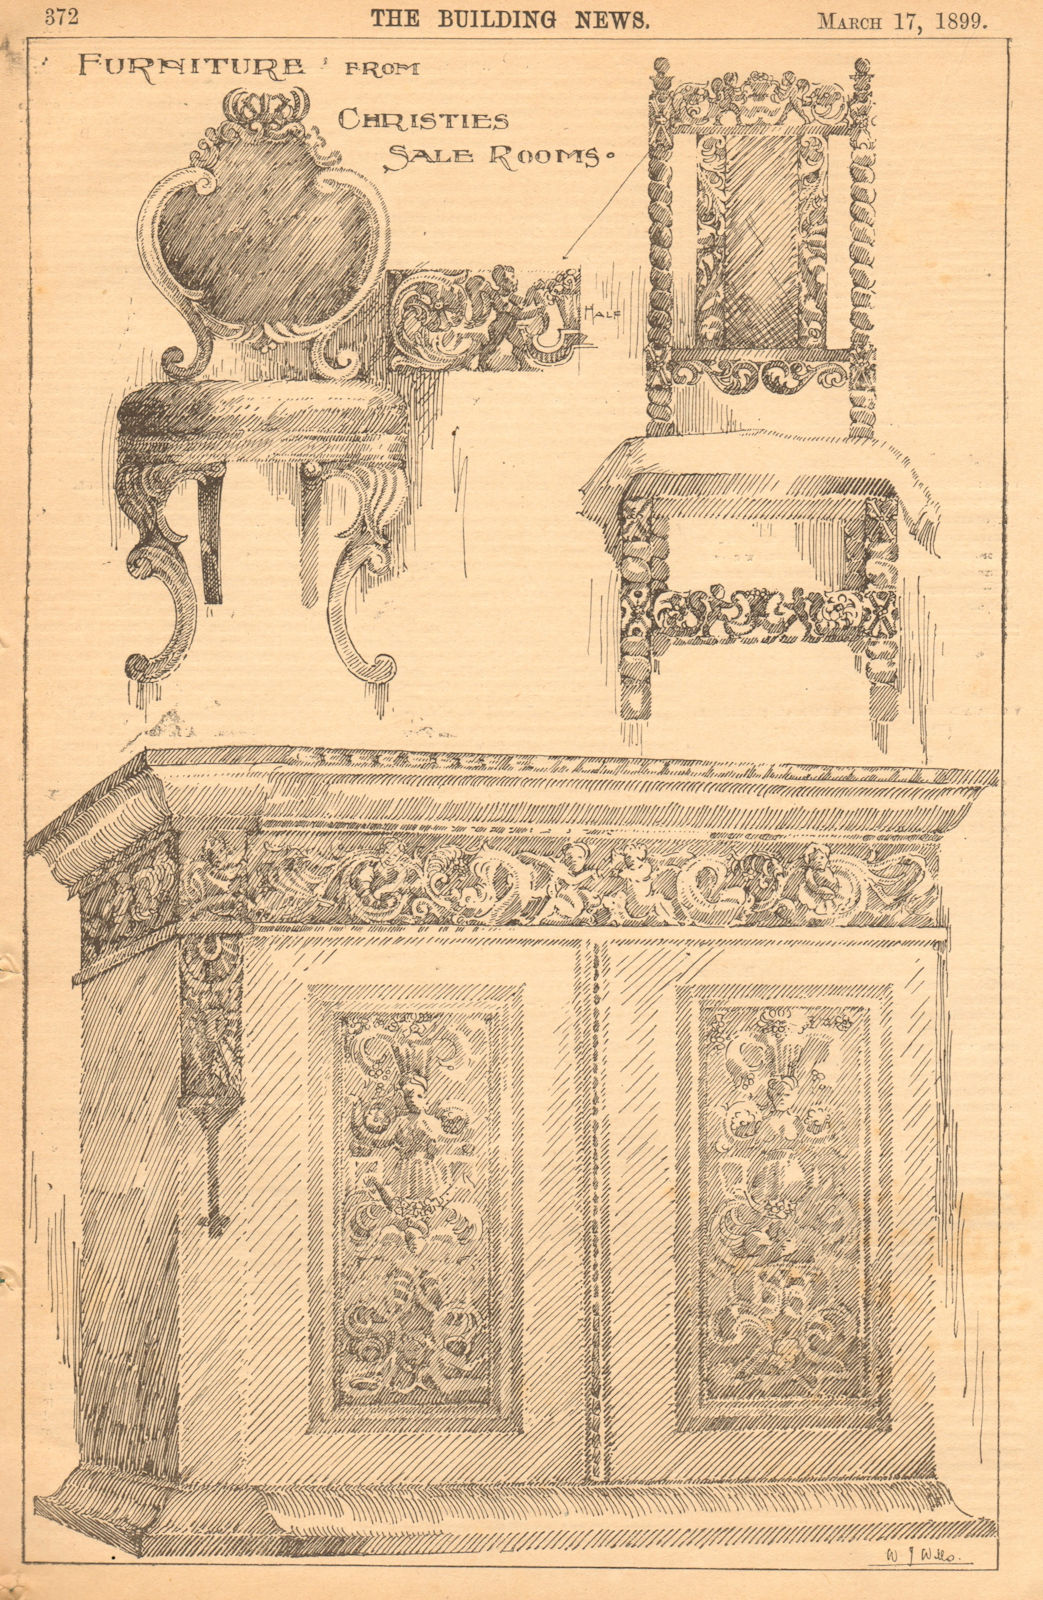 Associate Product Furniture from Christies Sale Rooms. Auctions 1899 old antique print picture